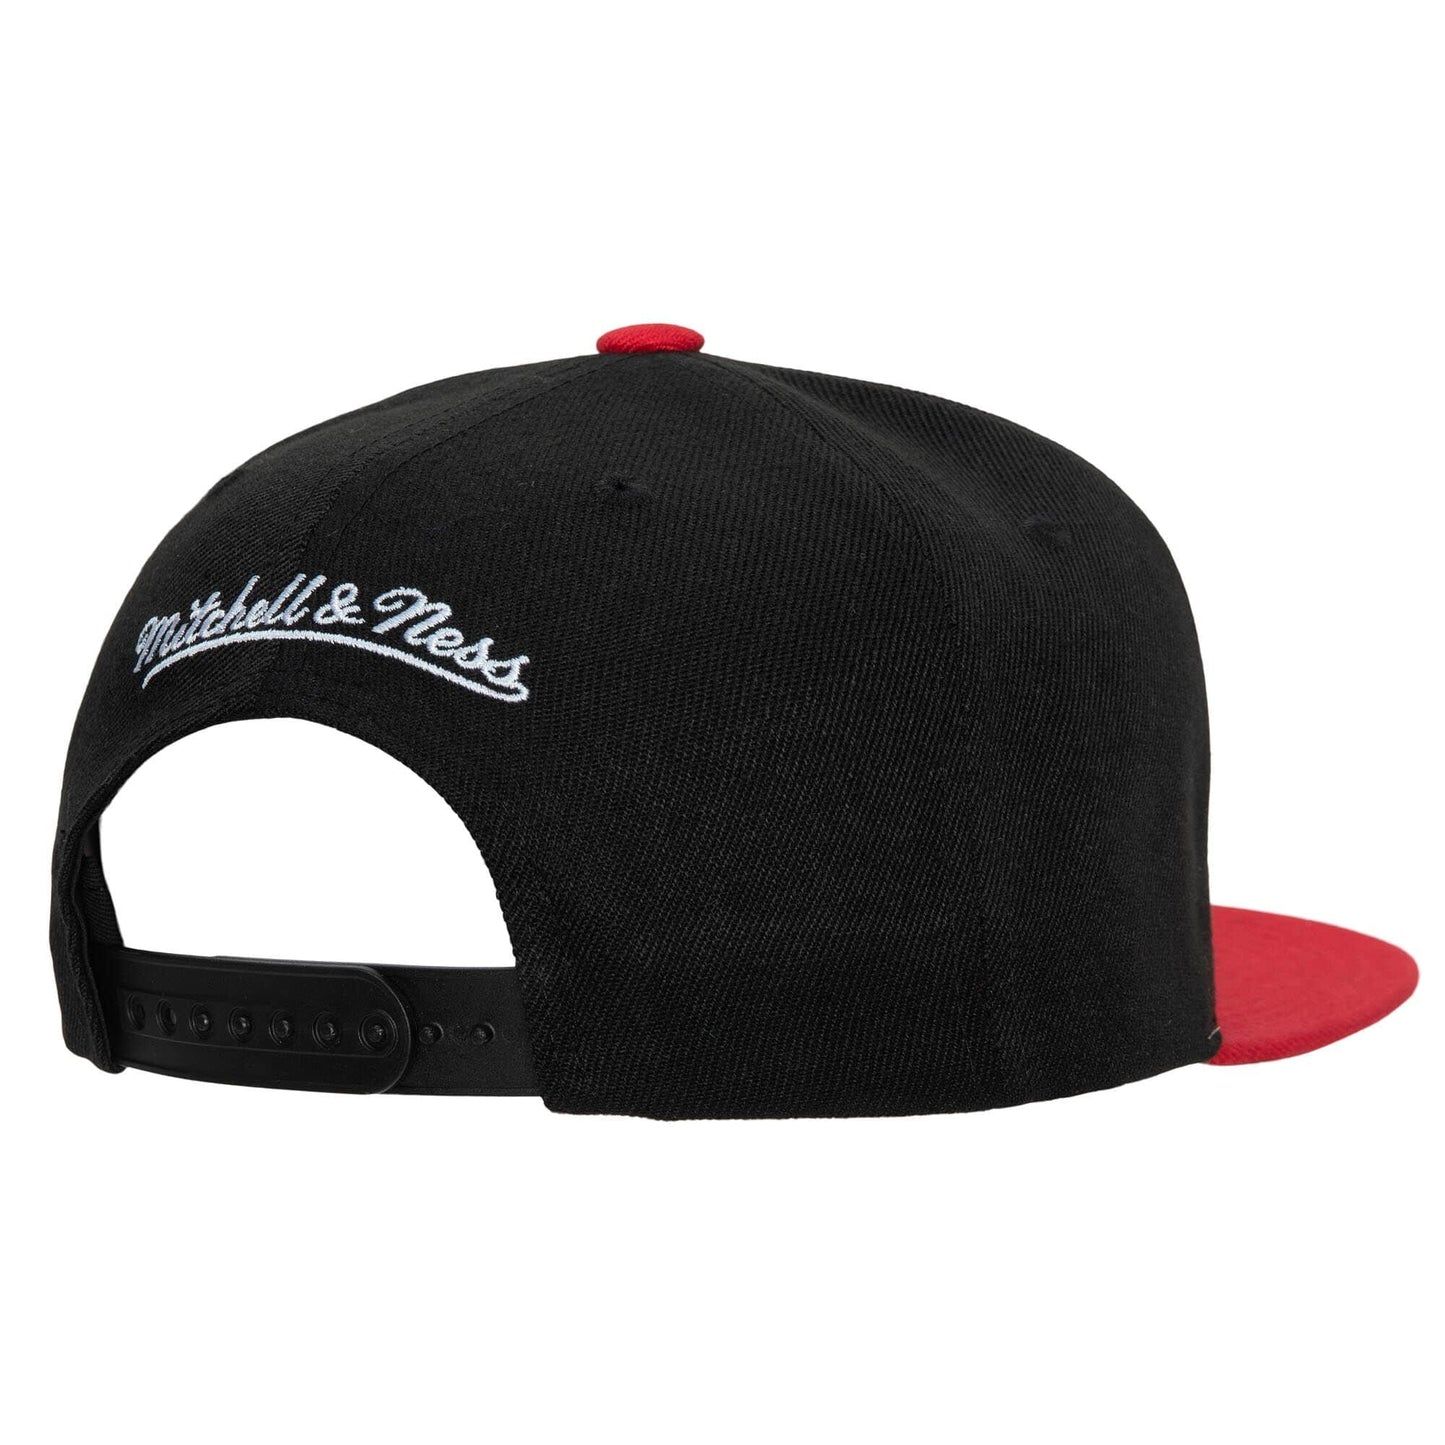 Men's Houston Rockets Mitchell & Ness 2 Tone Black and Red Low Big Face Hardwood Classics Snapback Hat